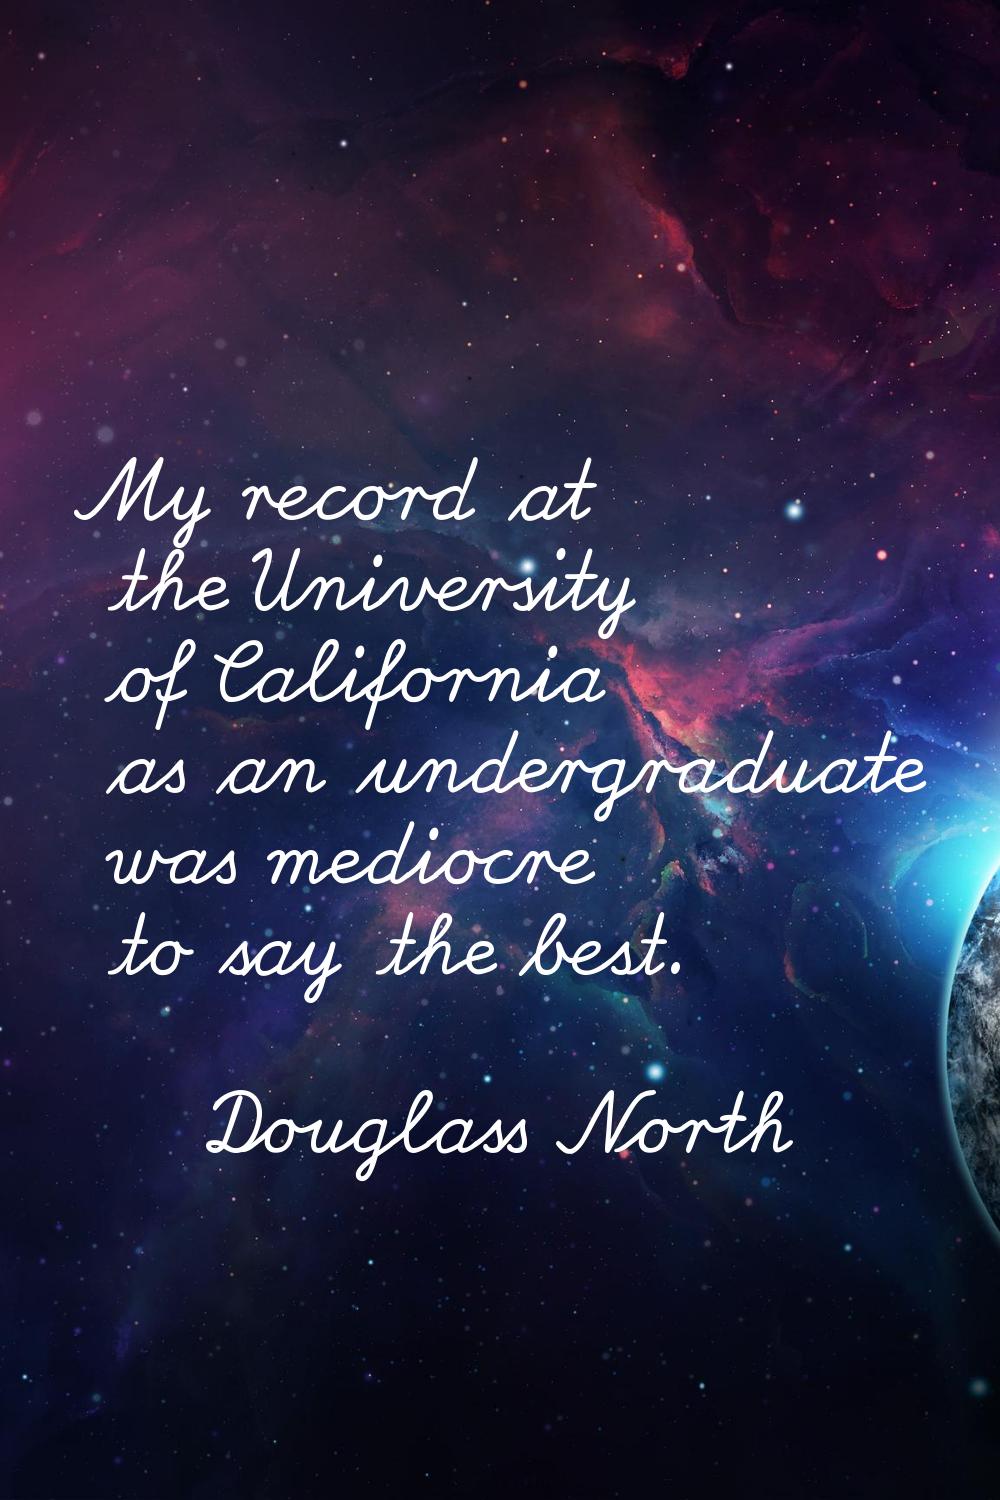 My record at the University of California as an undergraduate was mediocre to say the best.